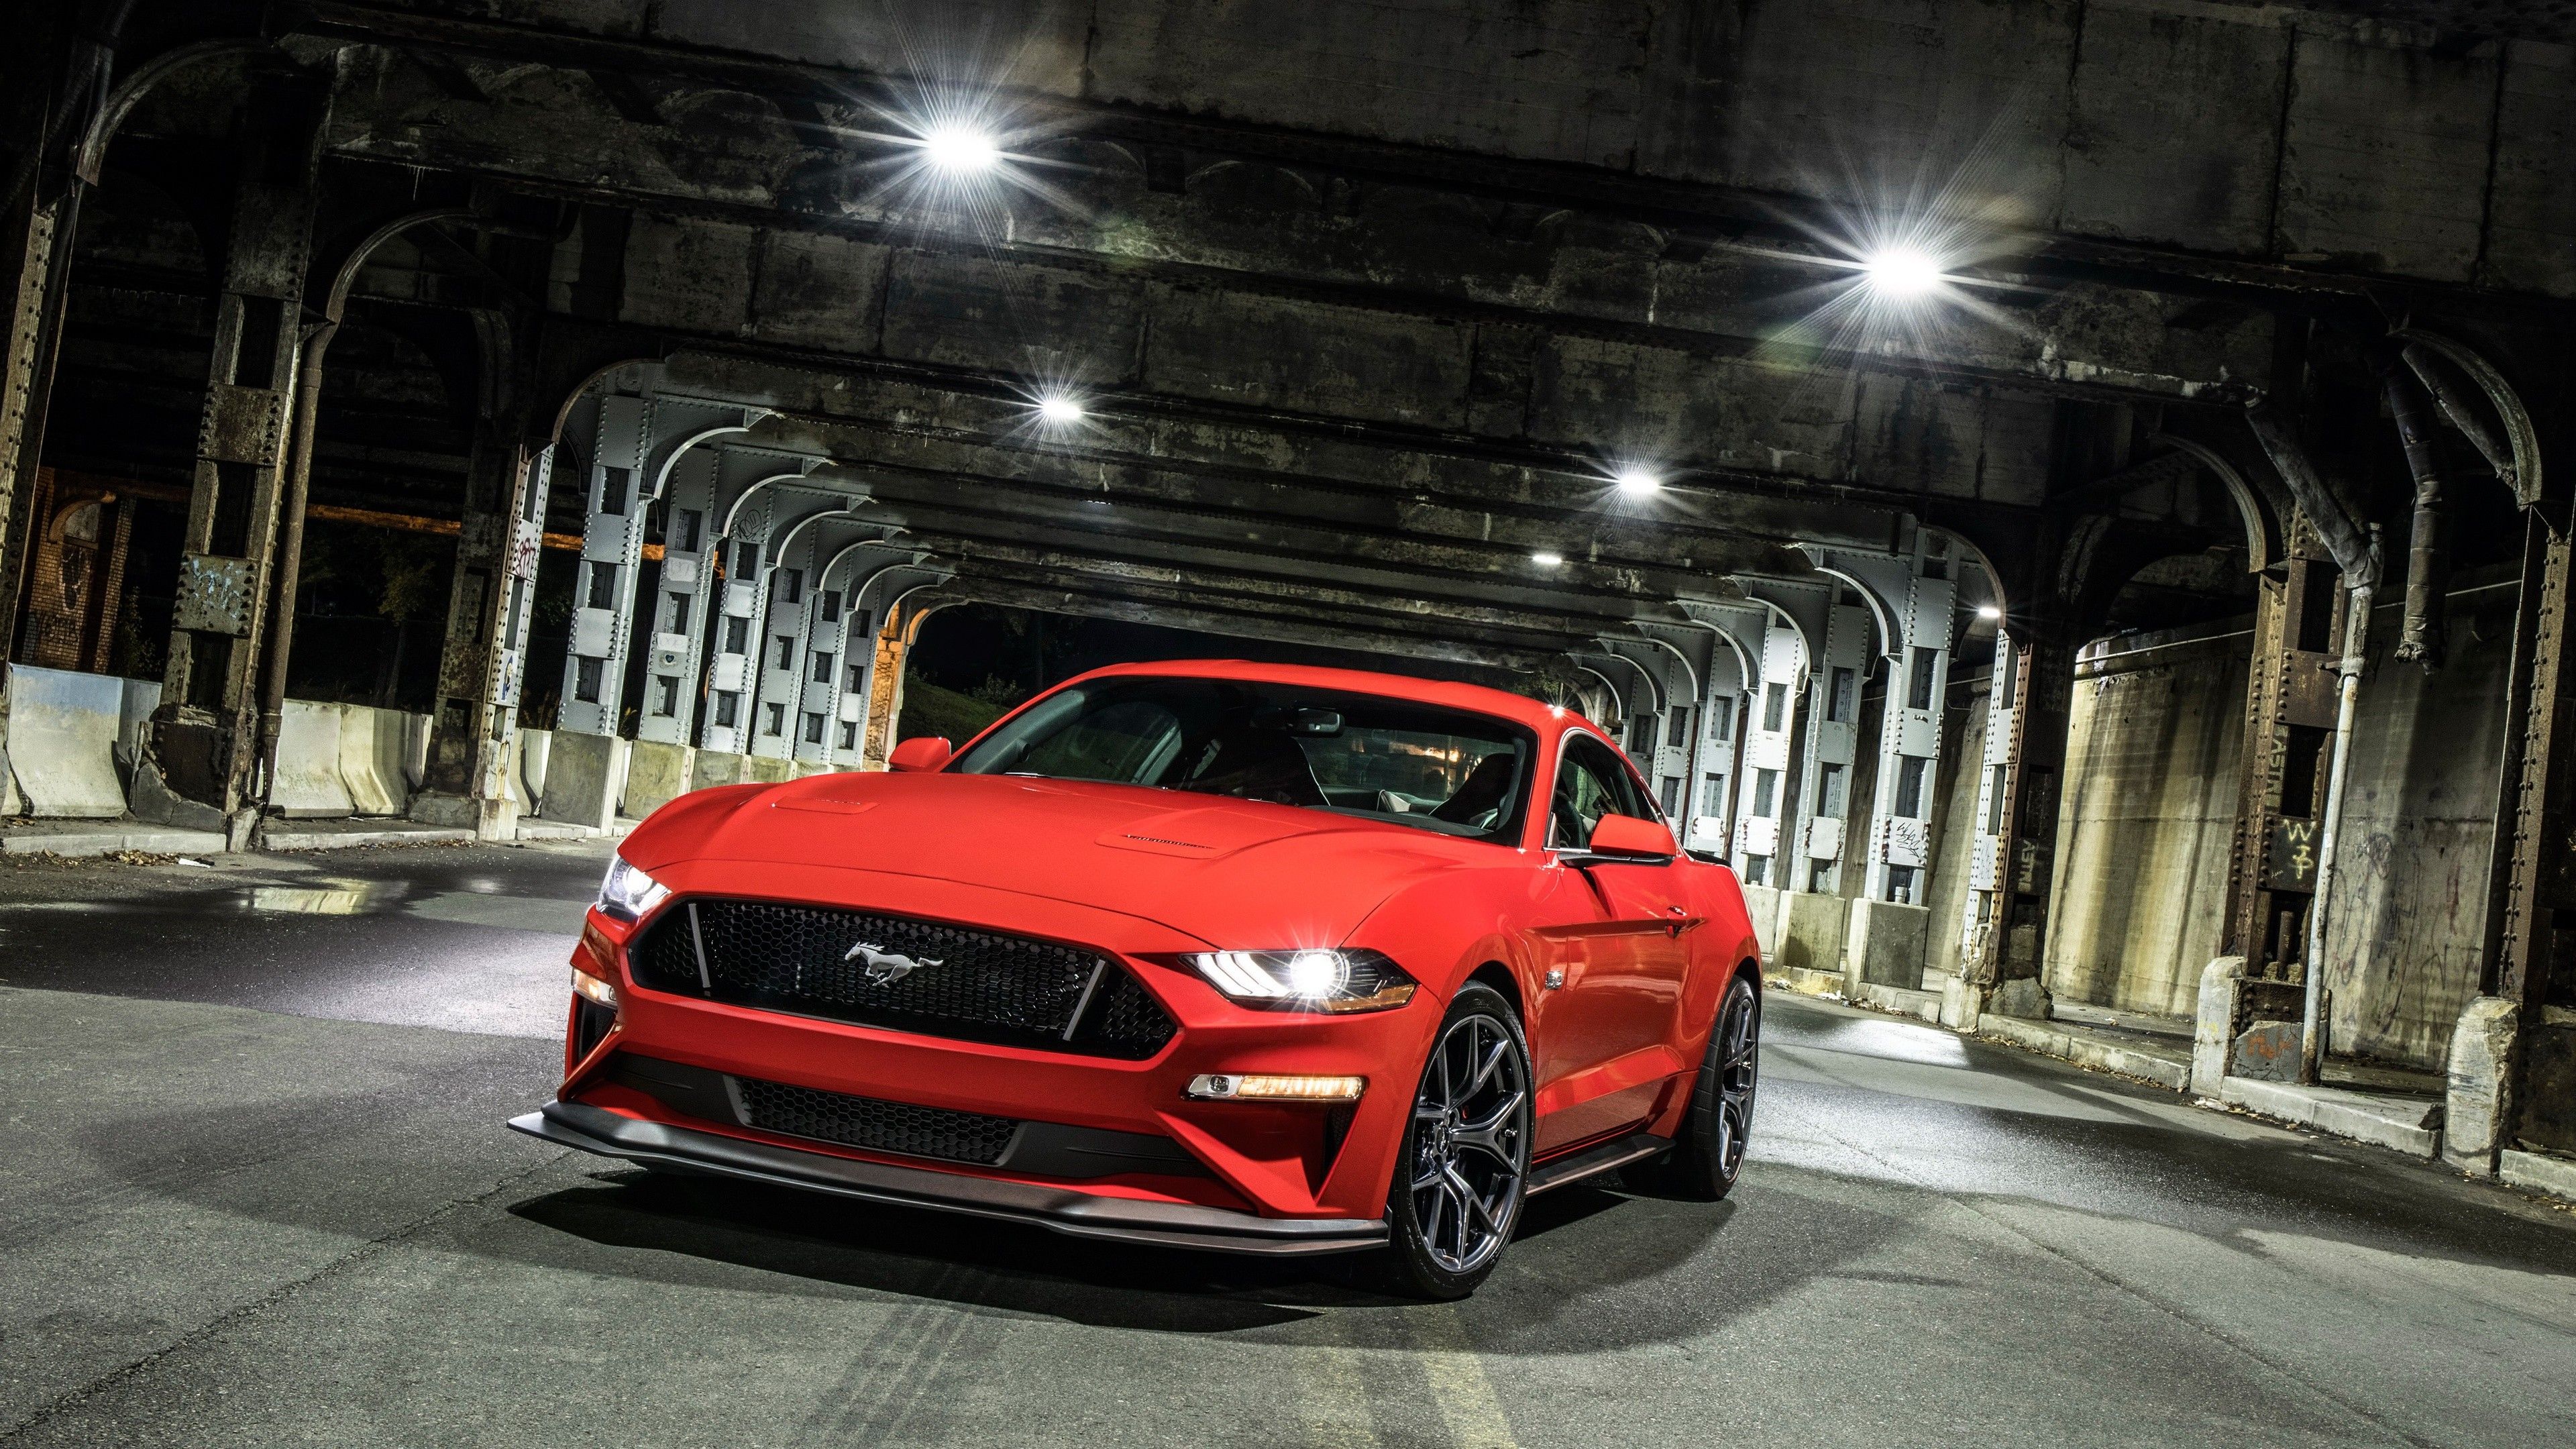 Ford Mustang wallpaper by musiyyab8110  Download on ZEDGE  8571